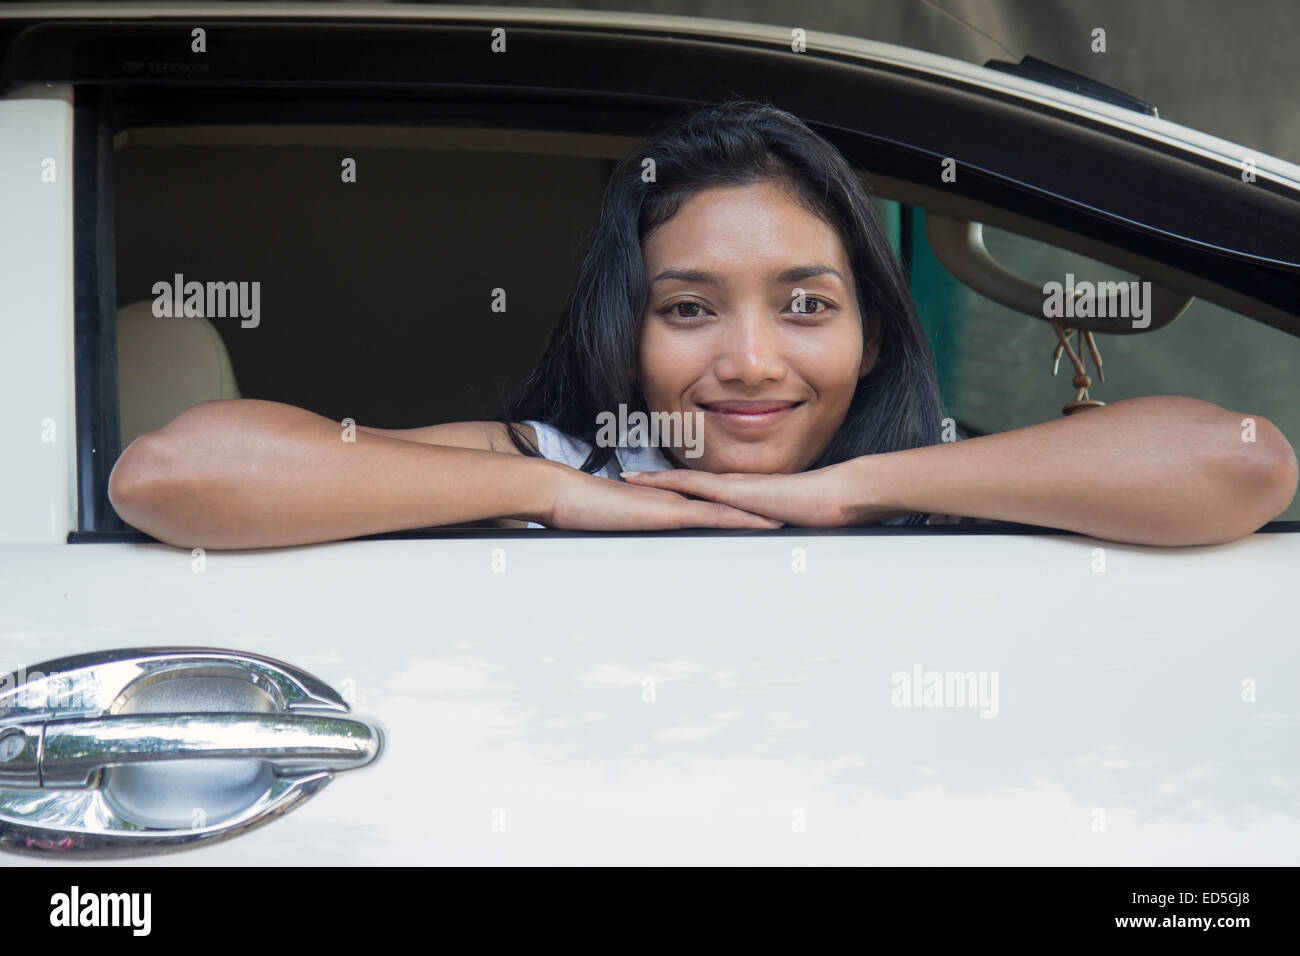 Young woman sitting in a car and looking out the window Stock Photo